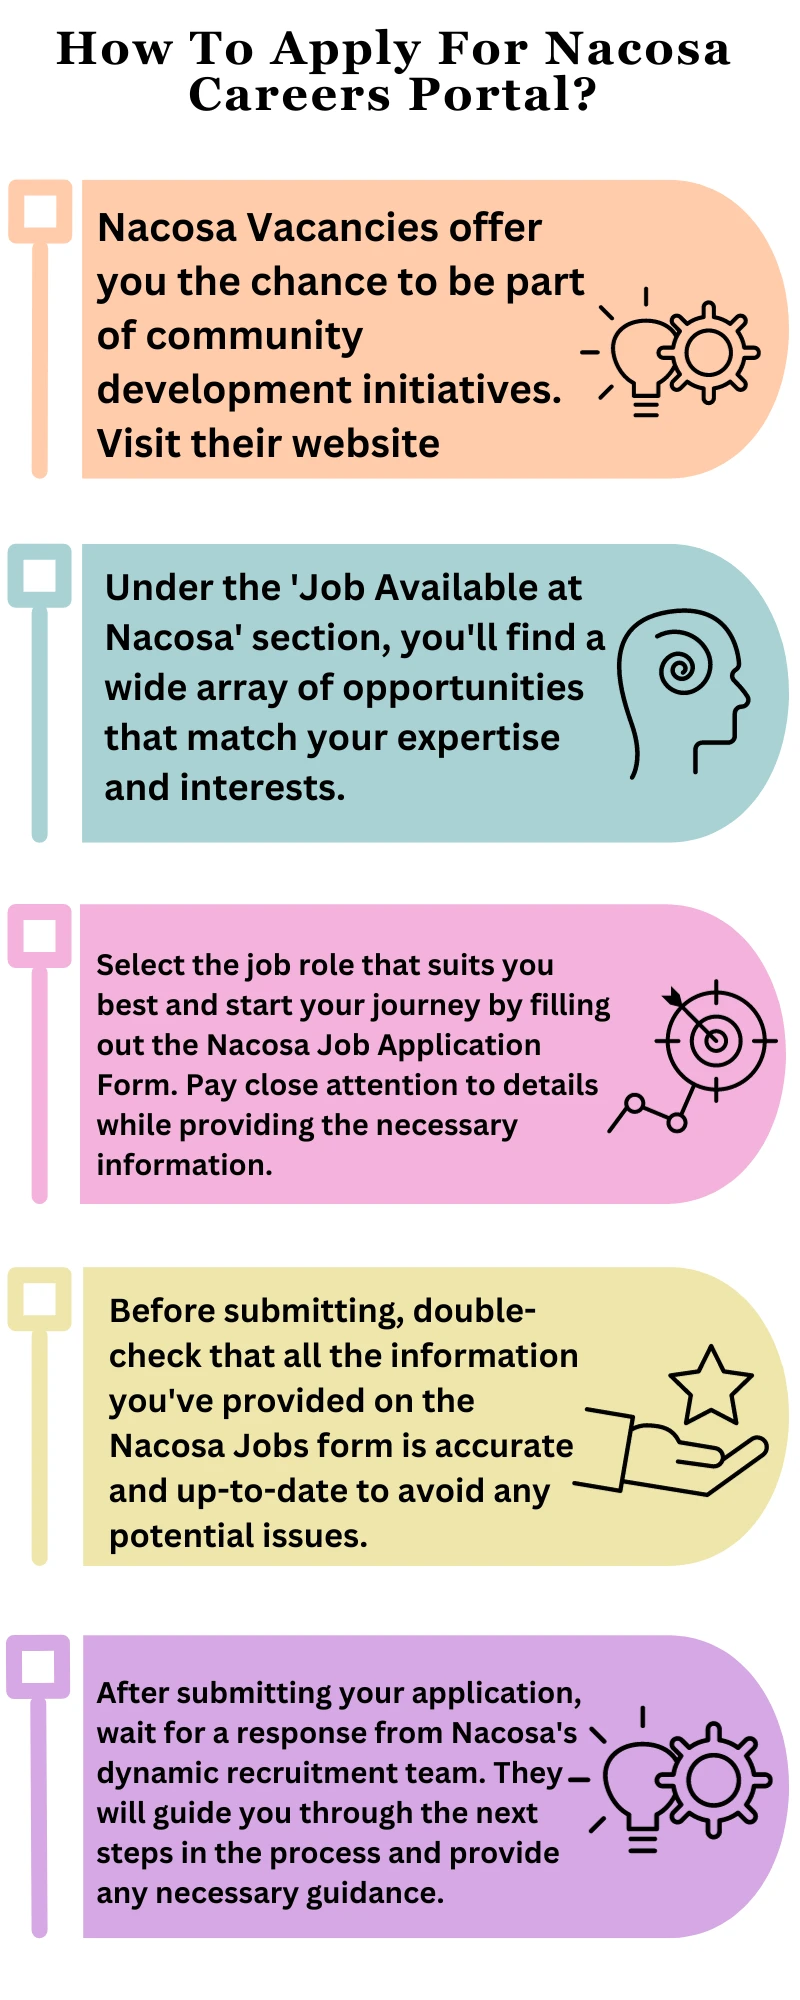 How To Apply For Nacosa Careers Portal?